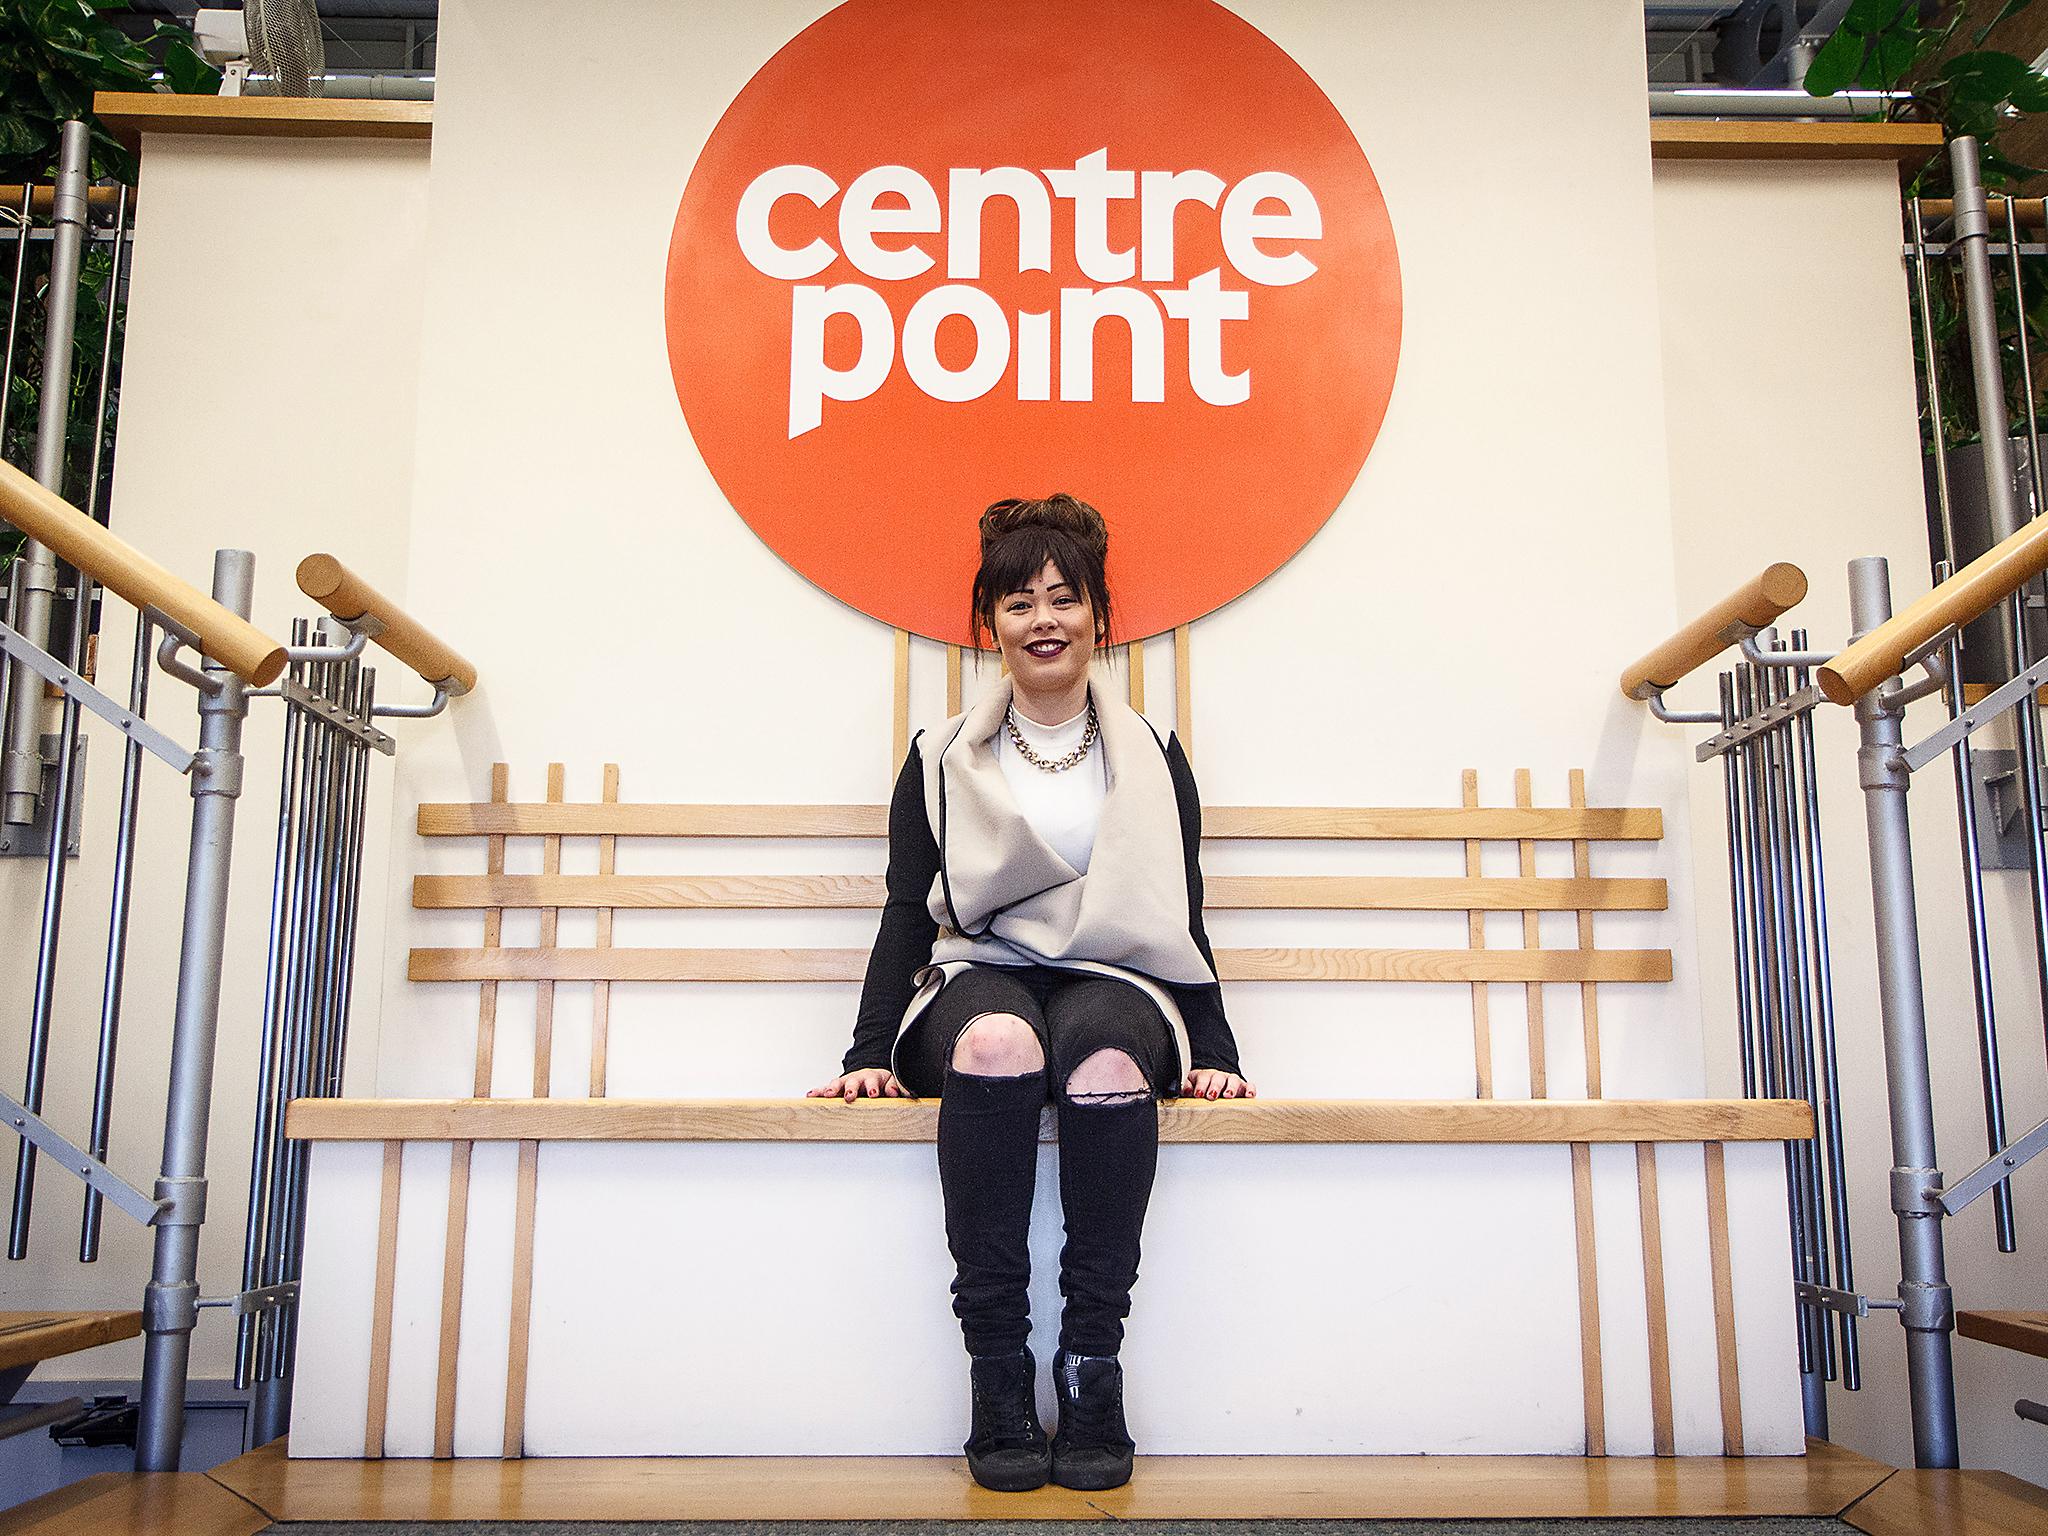 Centrepoint’s helpline is intended to give vulnerable young people advice and support